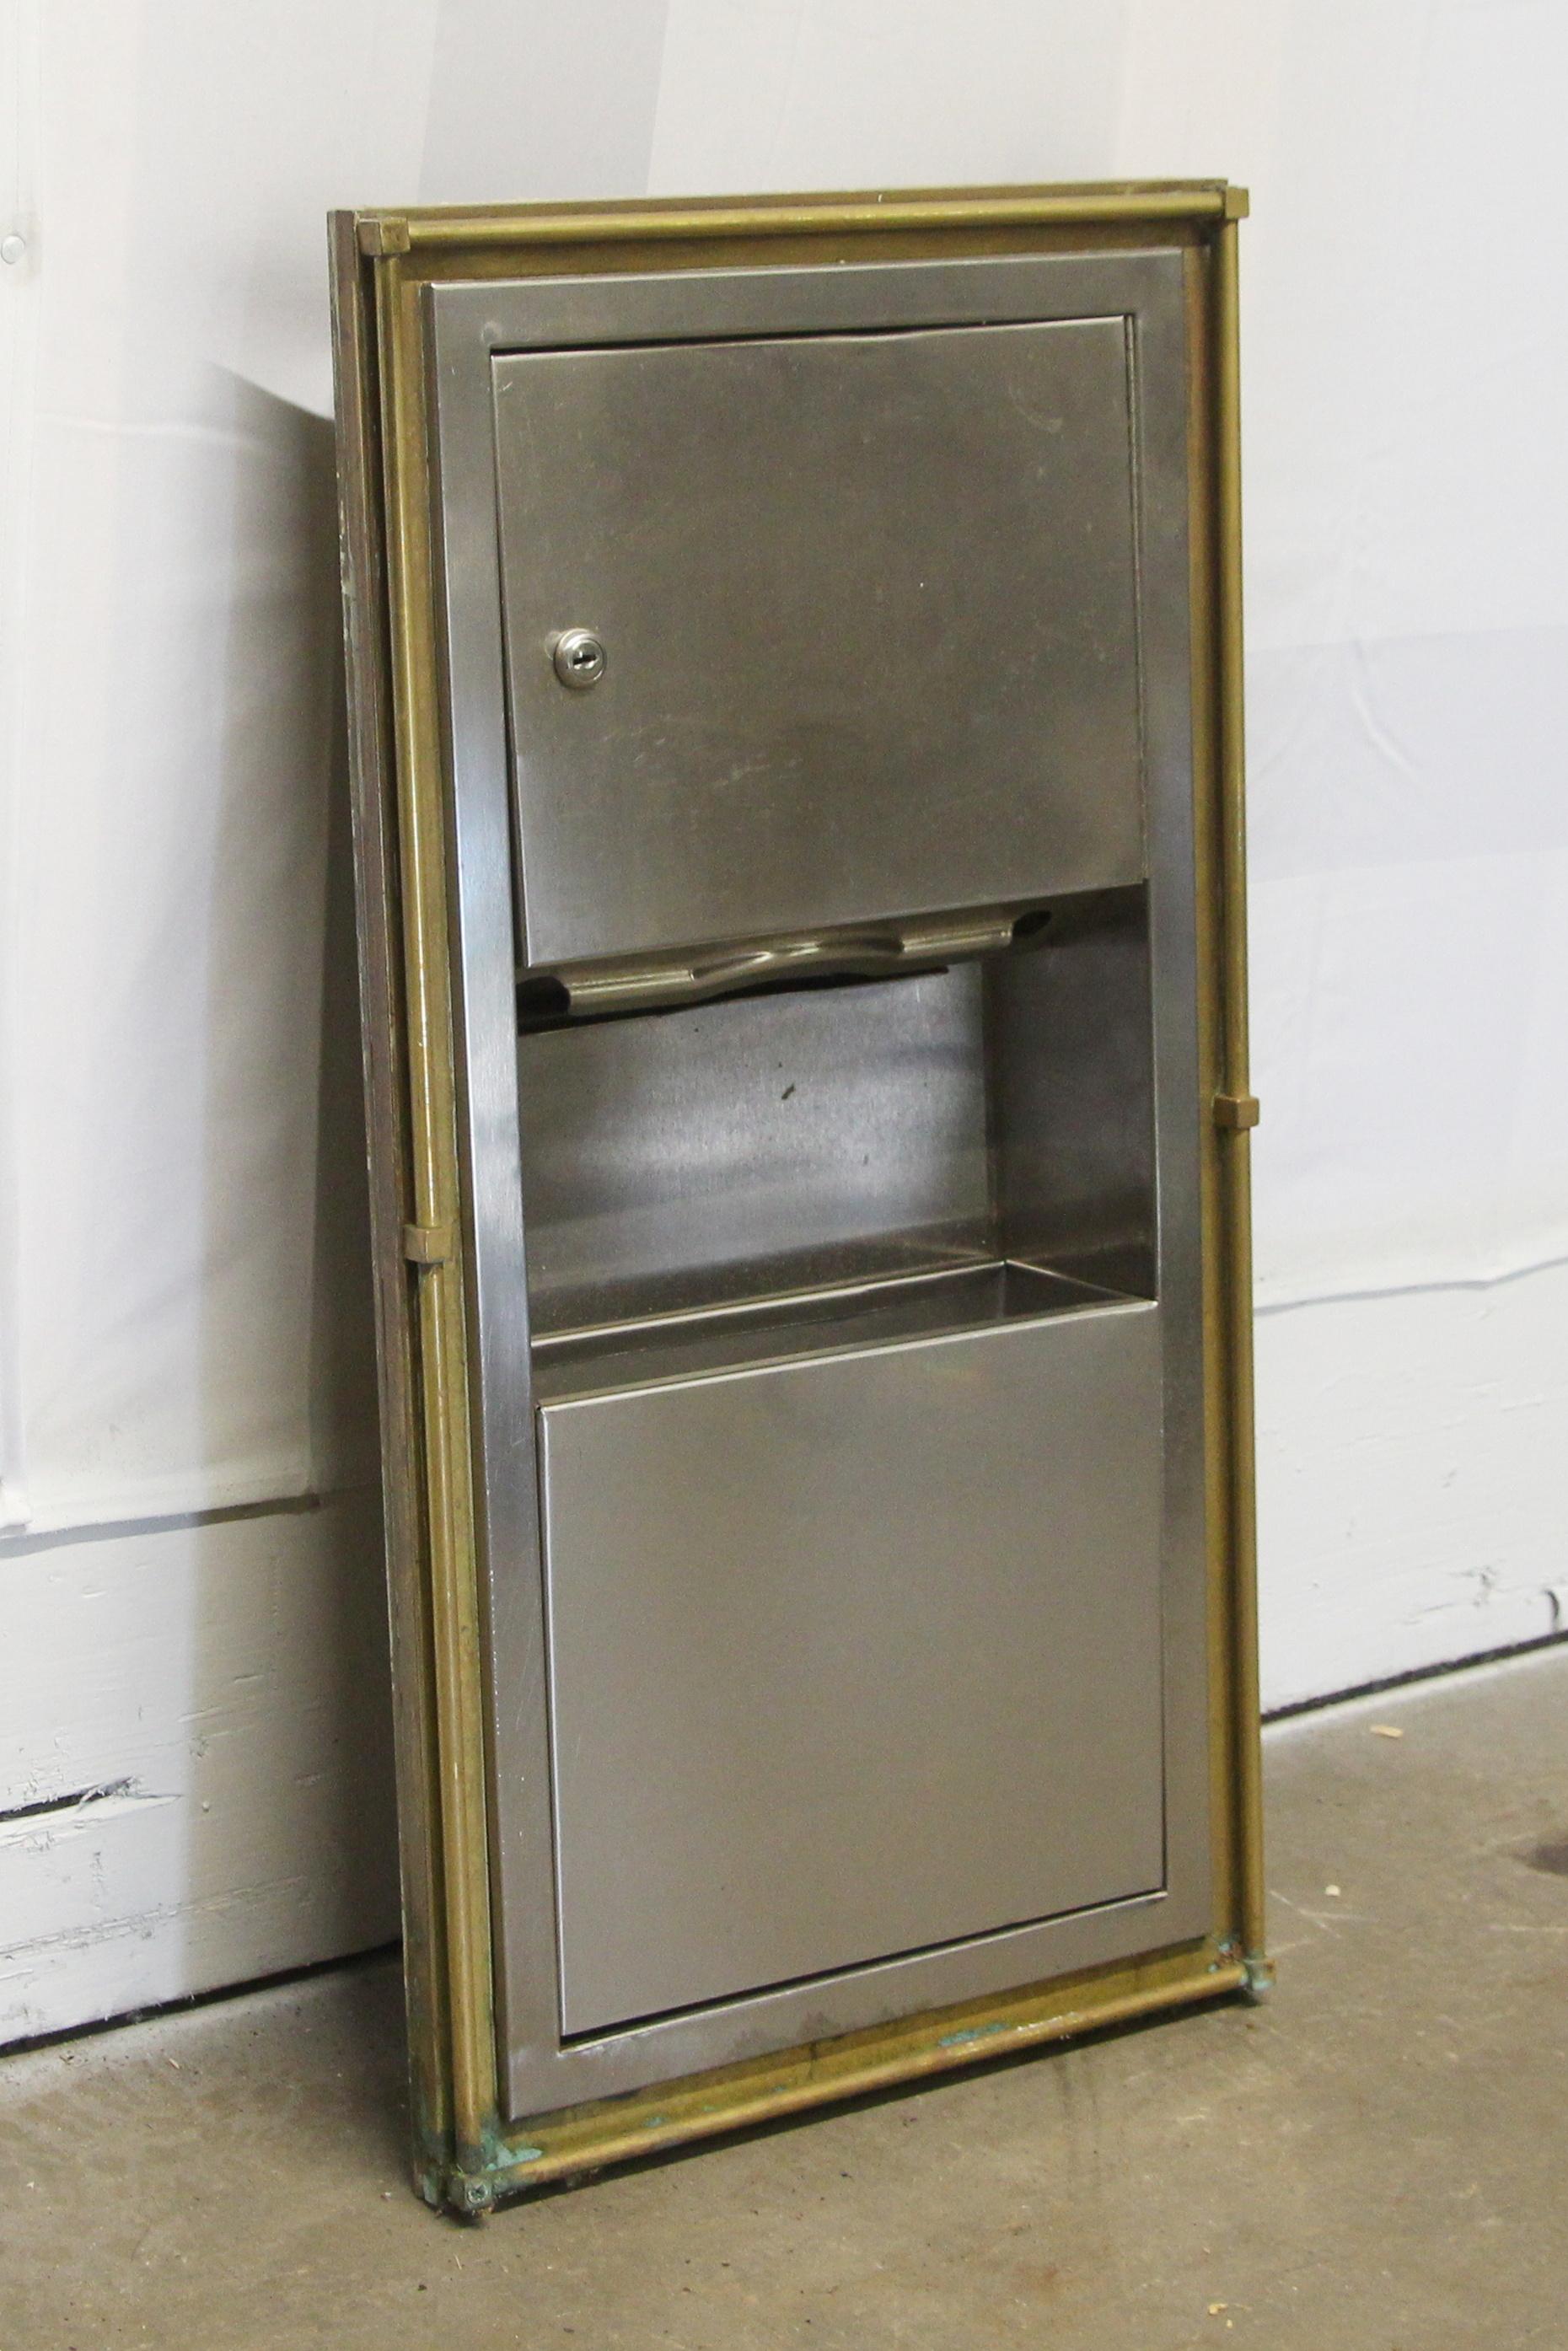 Reclaimed metal Waldorf Astoria paper towel holder and trash bin with original brass details. This was removed from the most recent renovation at the Waldorf. Purchase includes authenticity card. This can be seen at our 400 Gilligan St location in